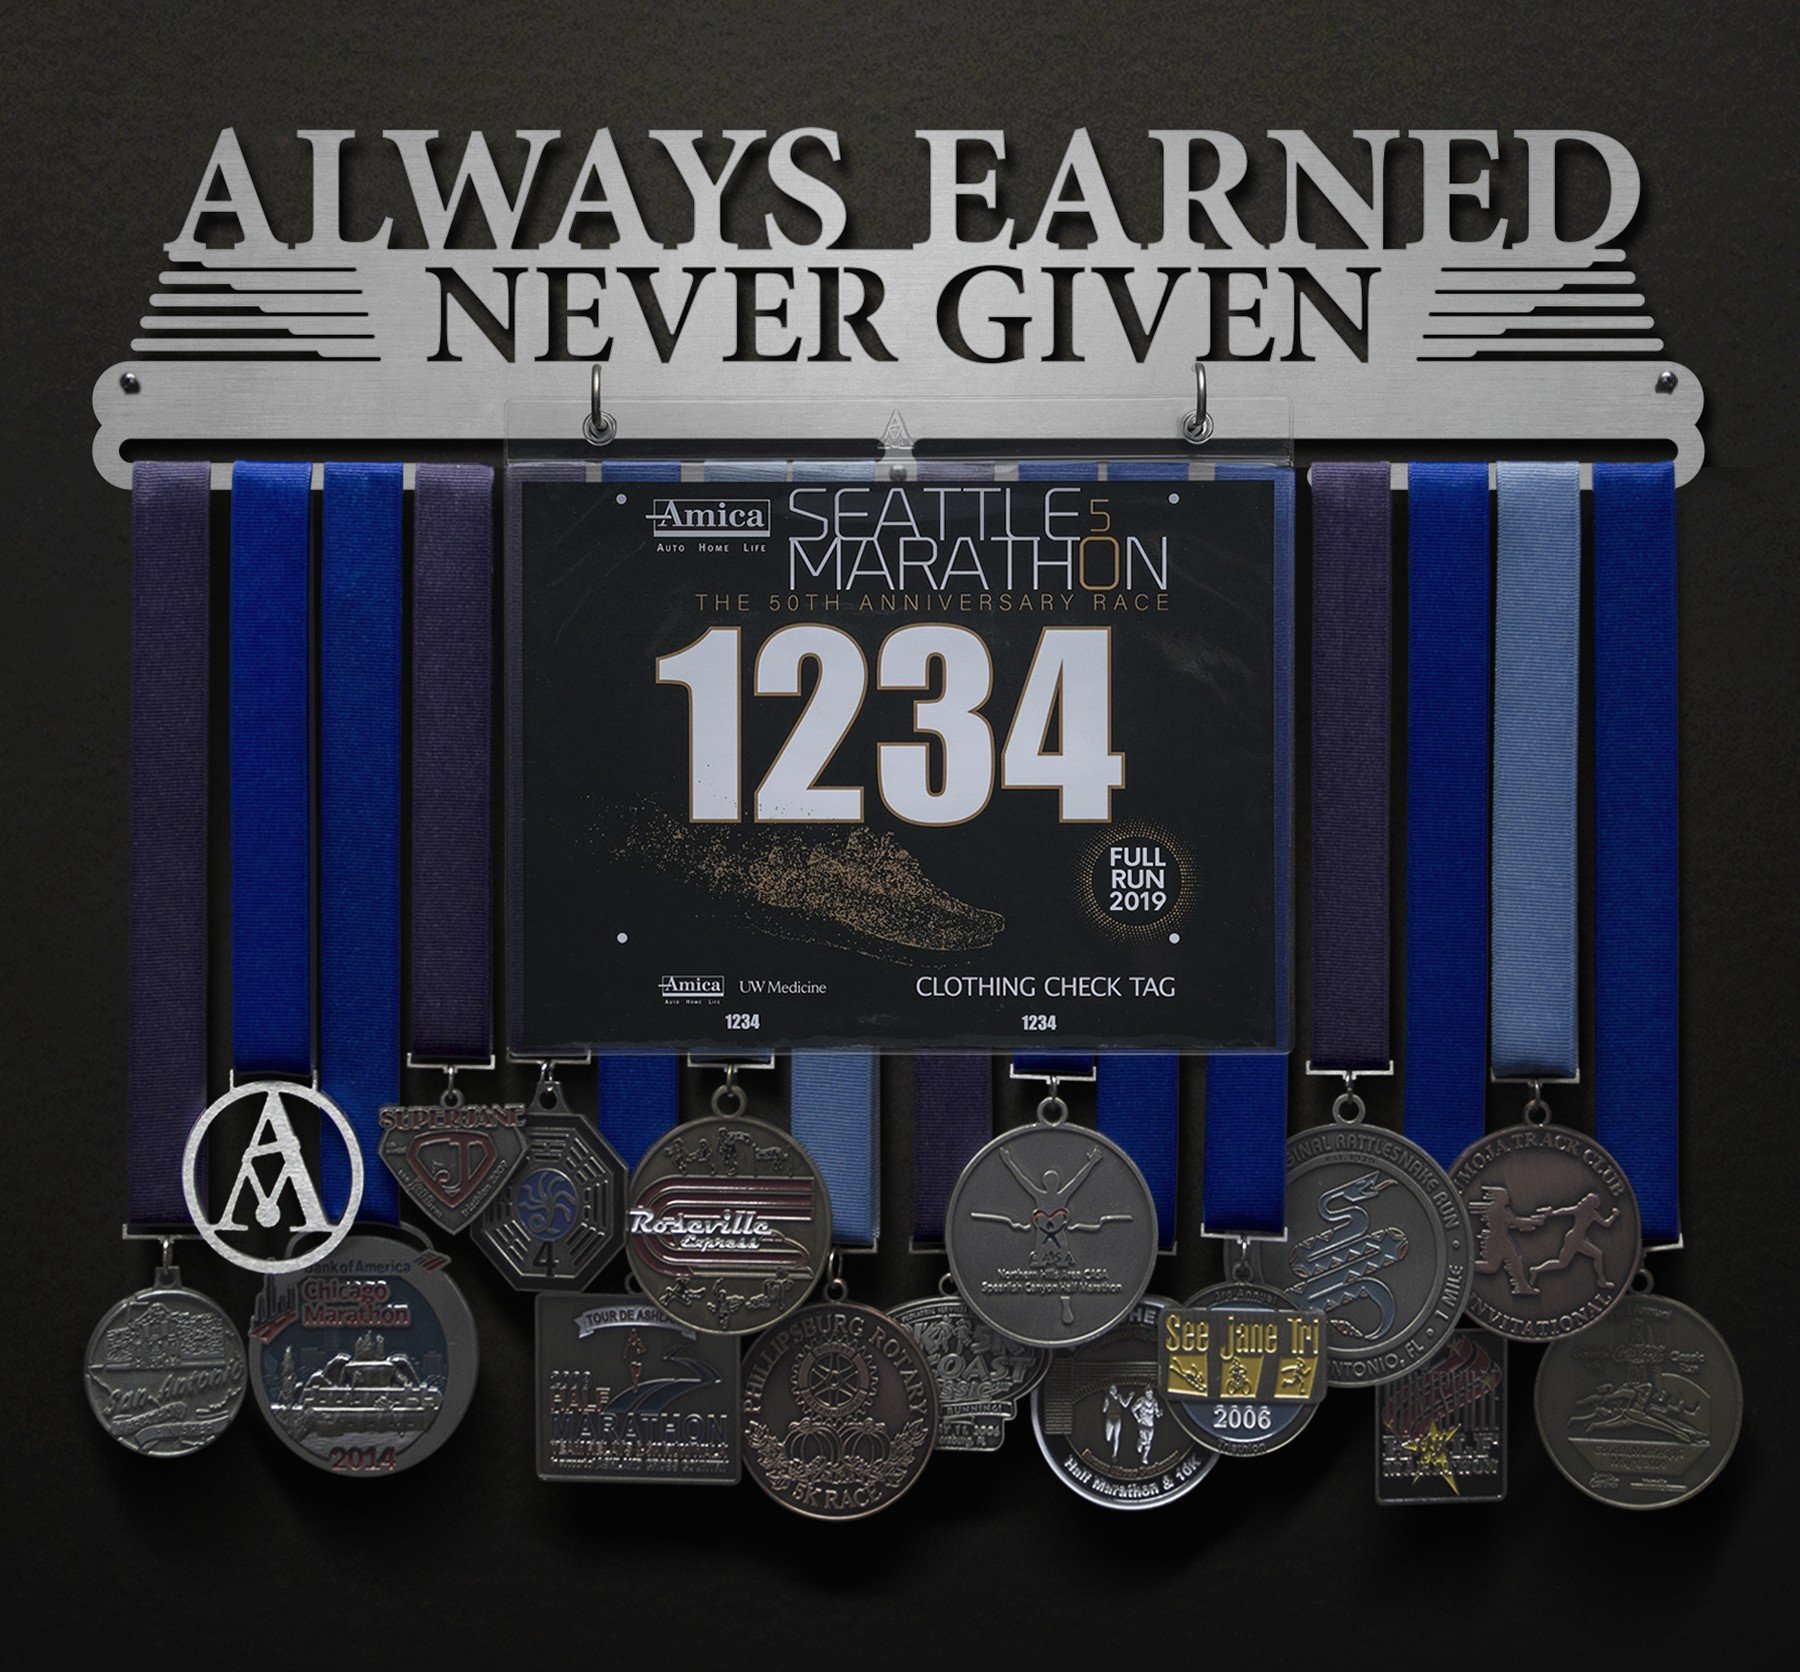 Always Earned Never Given Compact Bib and Medal Display